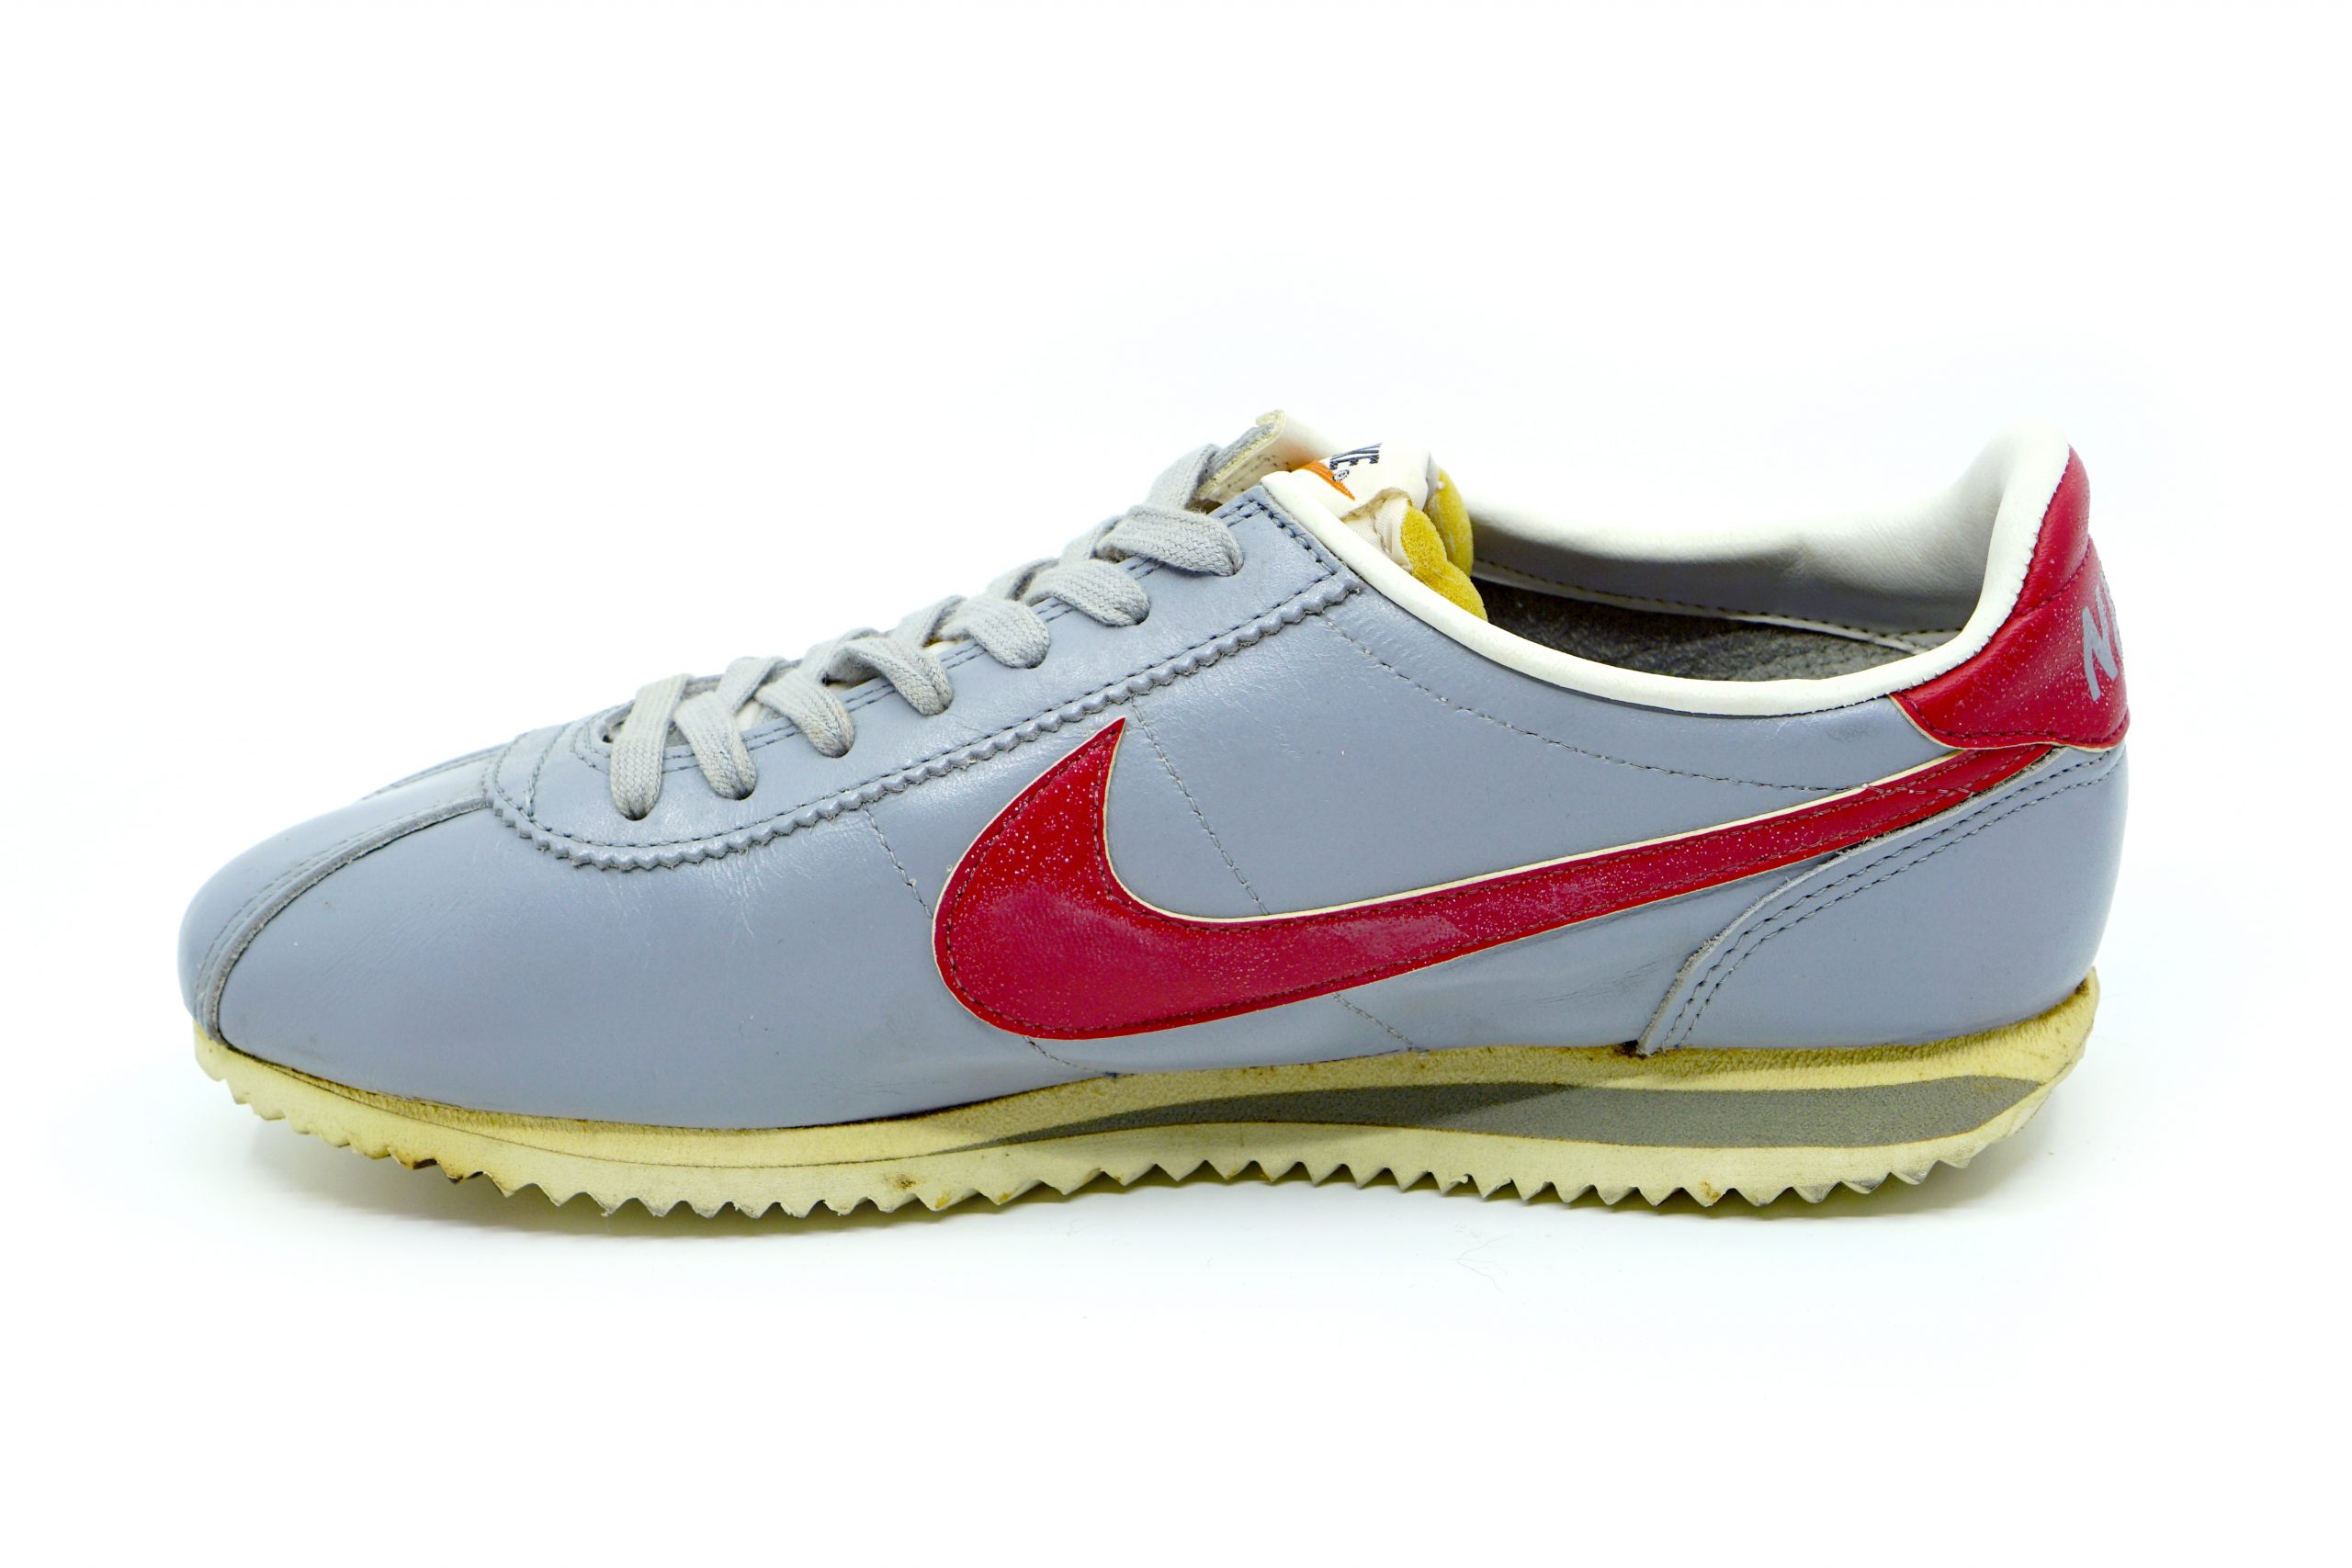 Vintage 1980 Nike nike leather tennis shoes Leather Cortez DX II